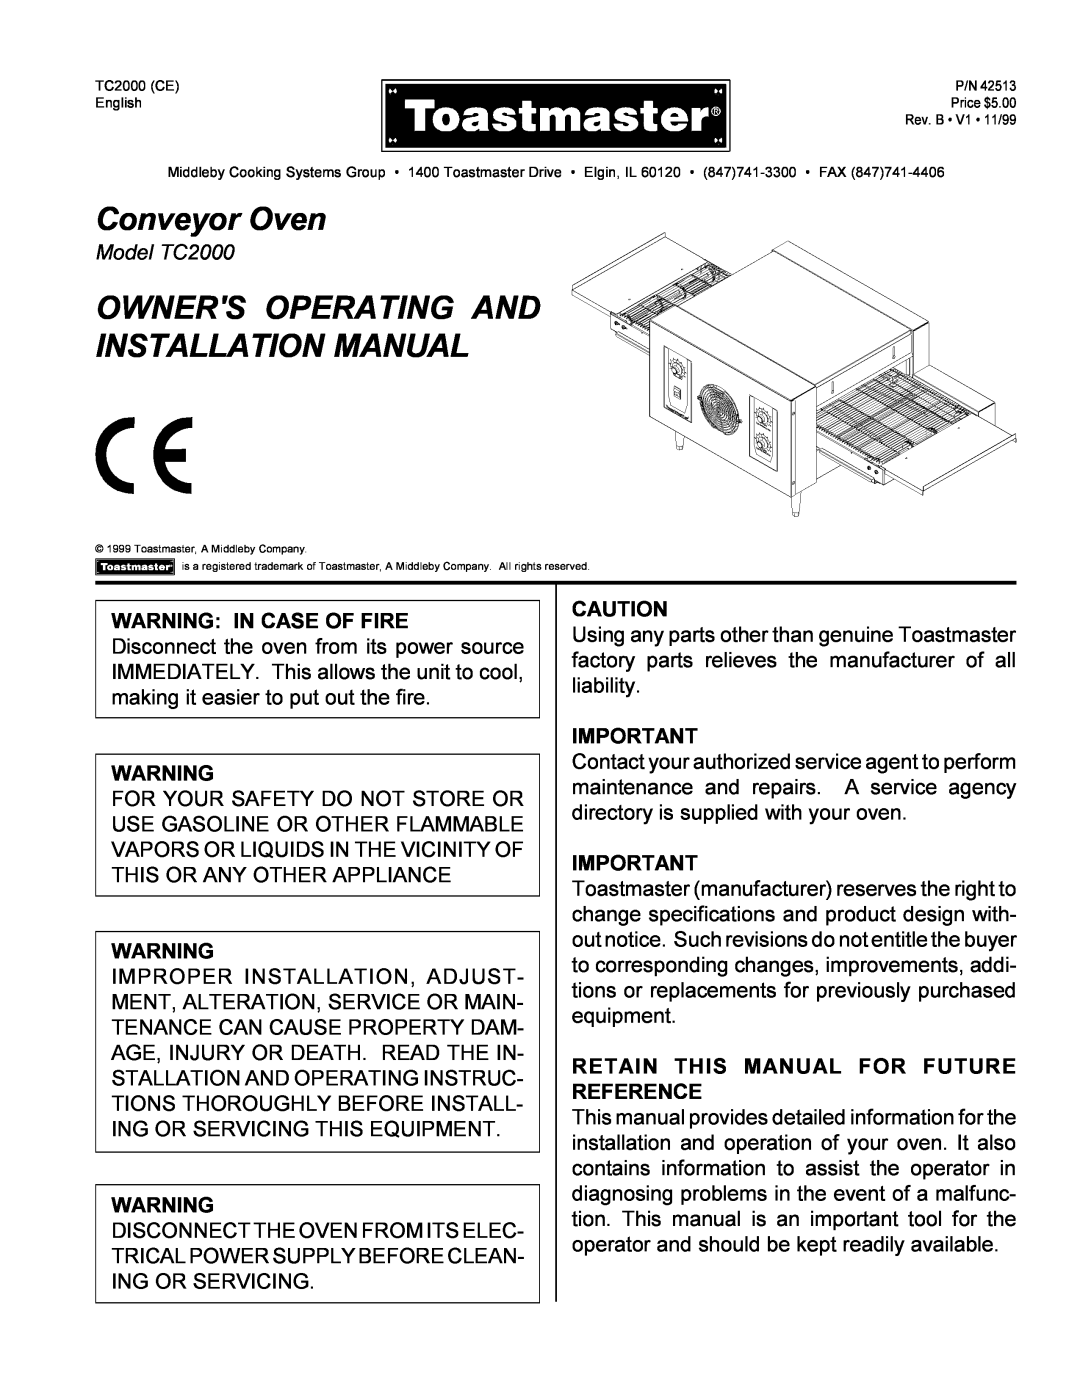 Toastmaster installation manual Retain This Manual For Future Reference, Conveyor Oven, Model TC2000 